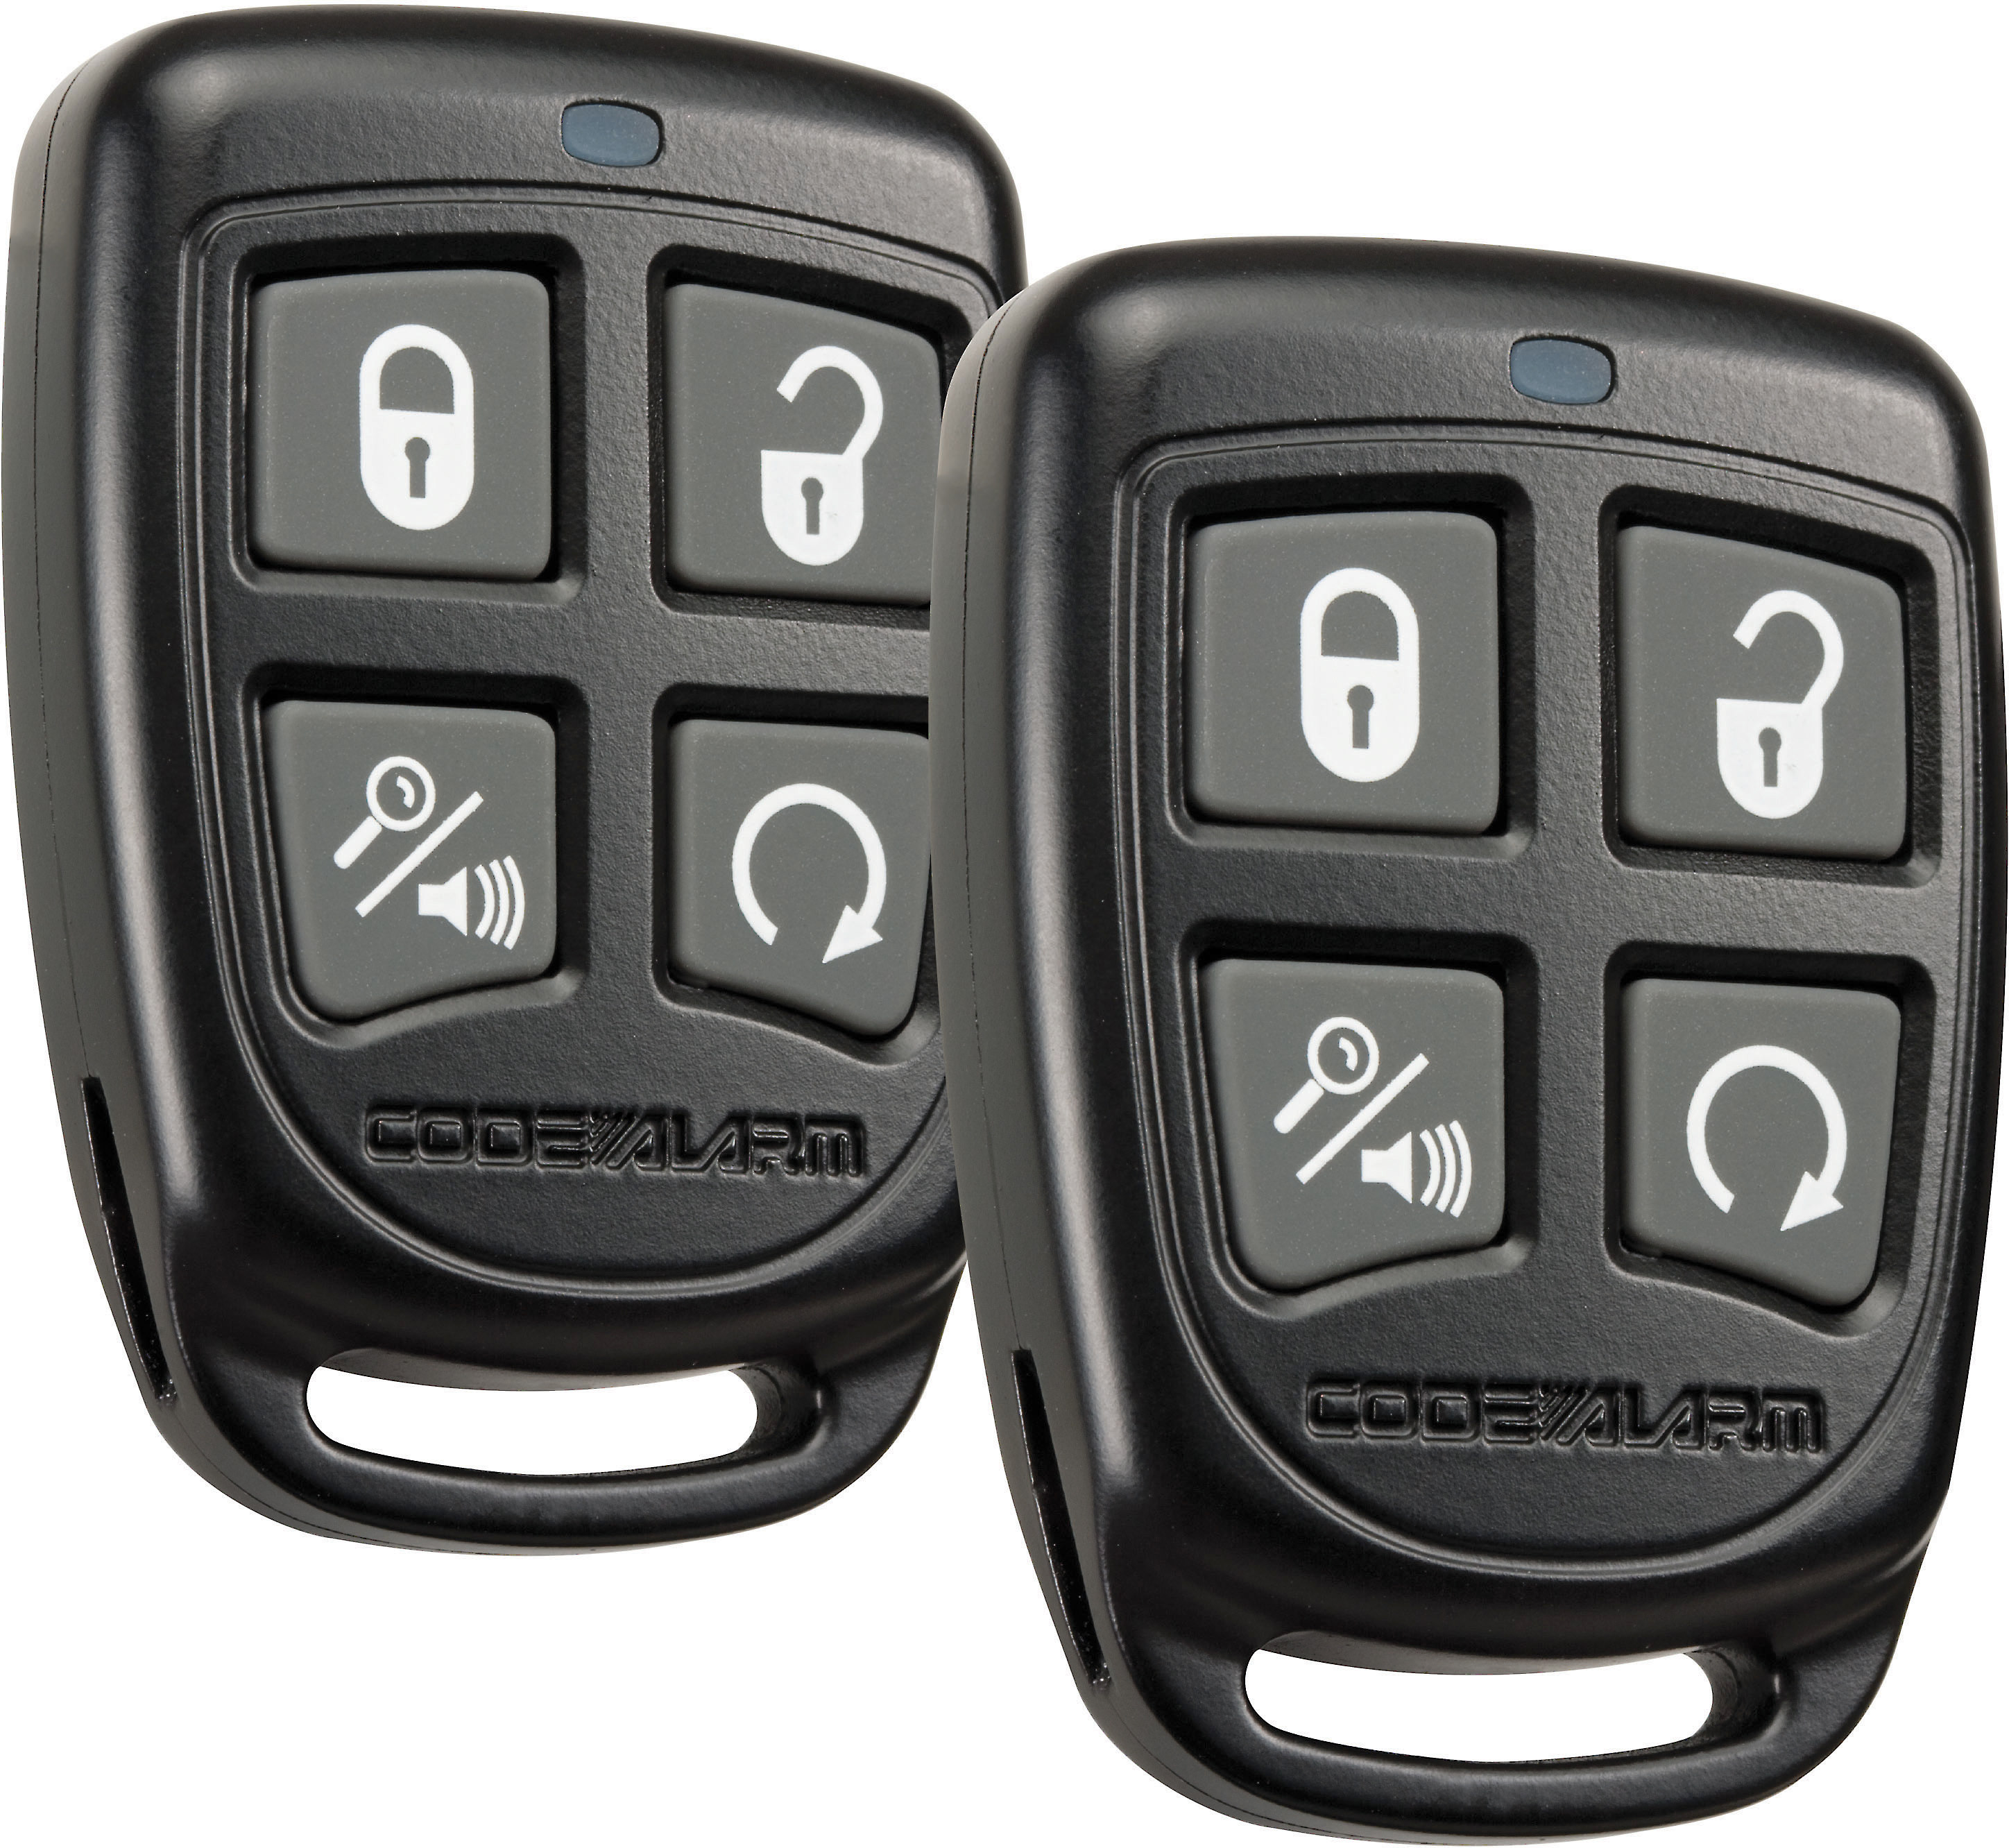 Code Alarm CA5054 Remote start system with keyless entry at Crutchfield